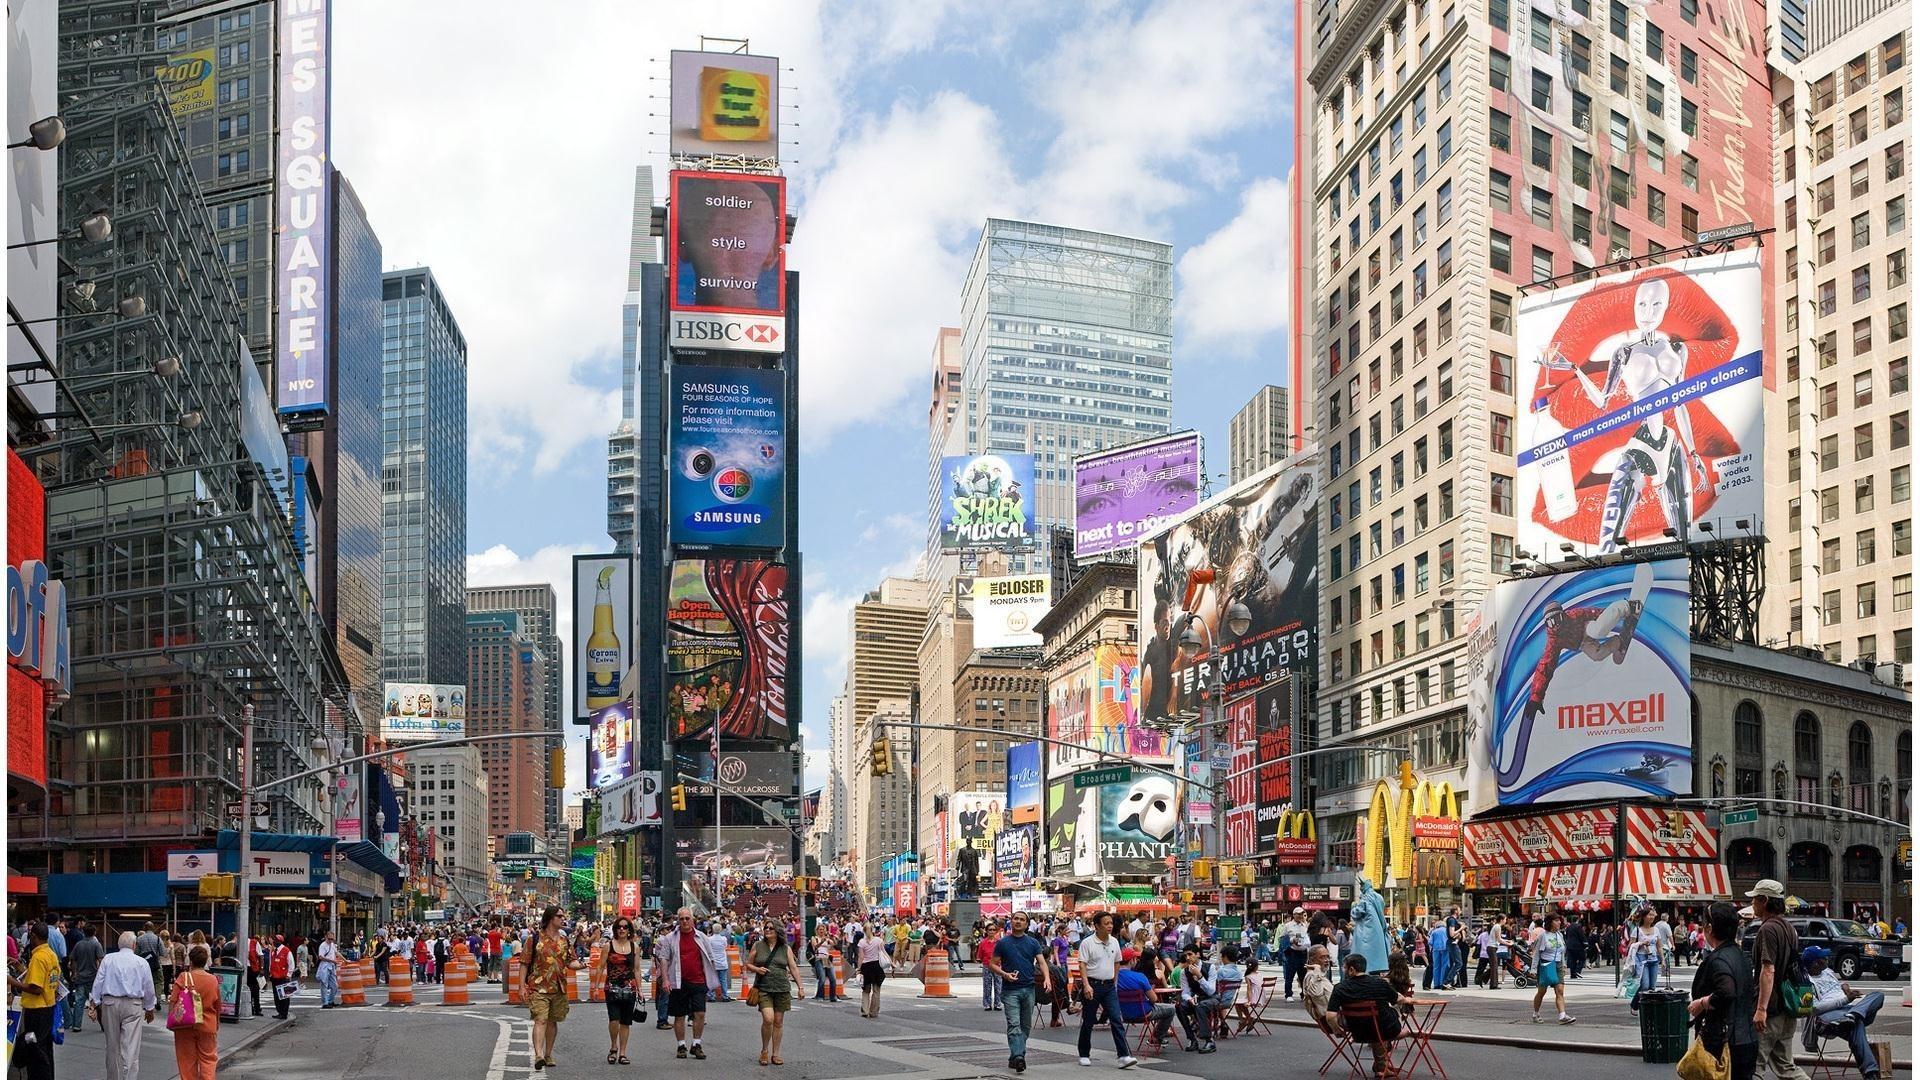 1920x1080 Cityscapes New York City Times Square wallpaper |  | 223141 |  WallpaperUP